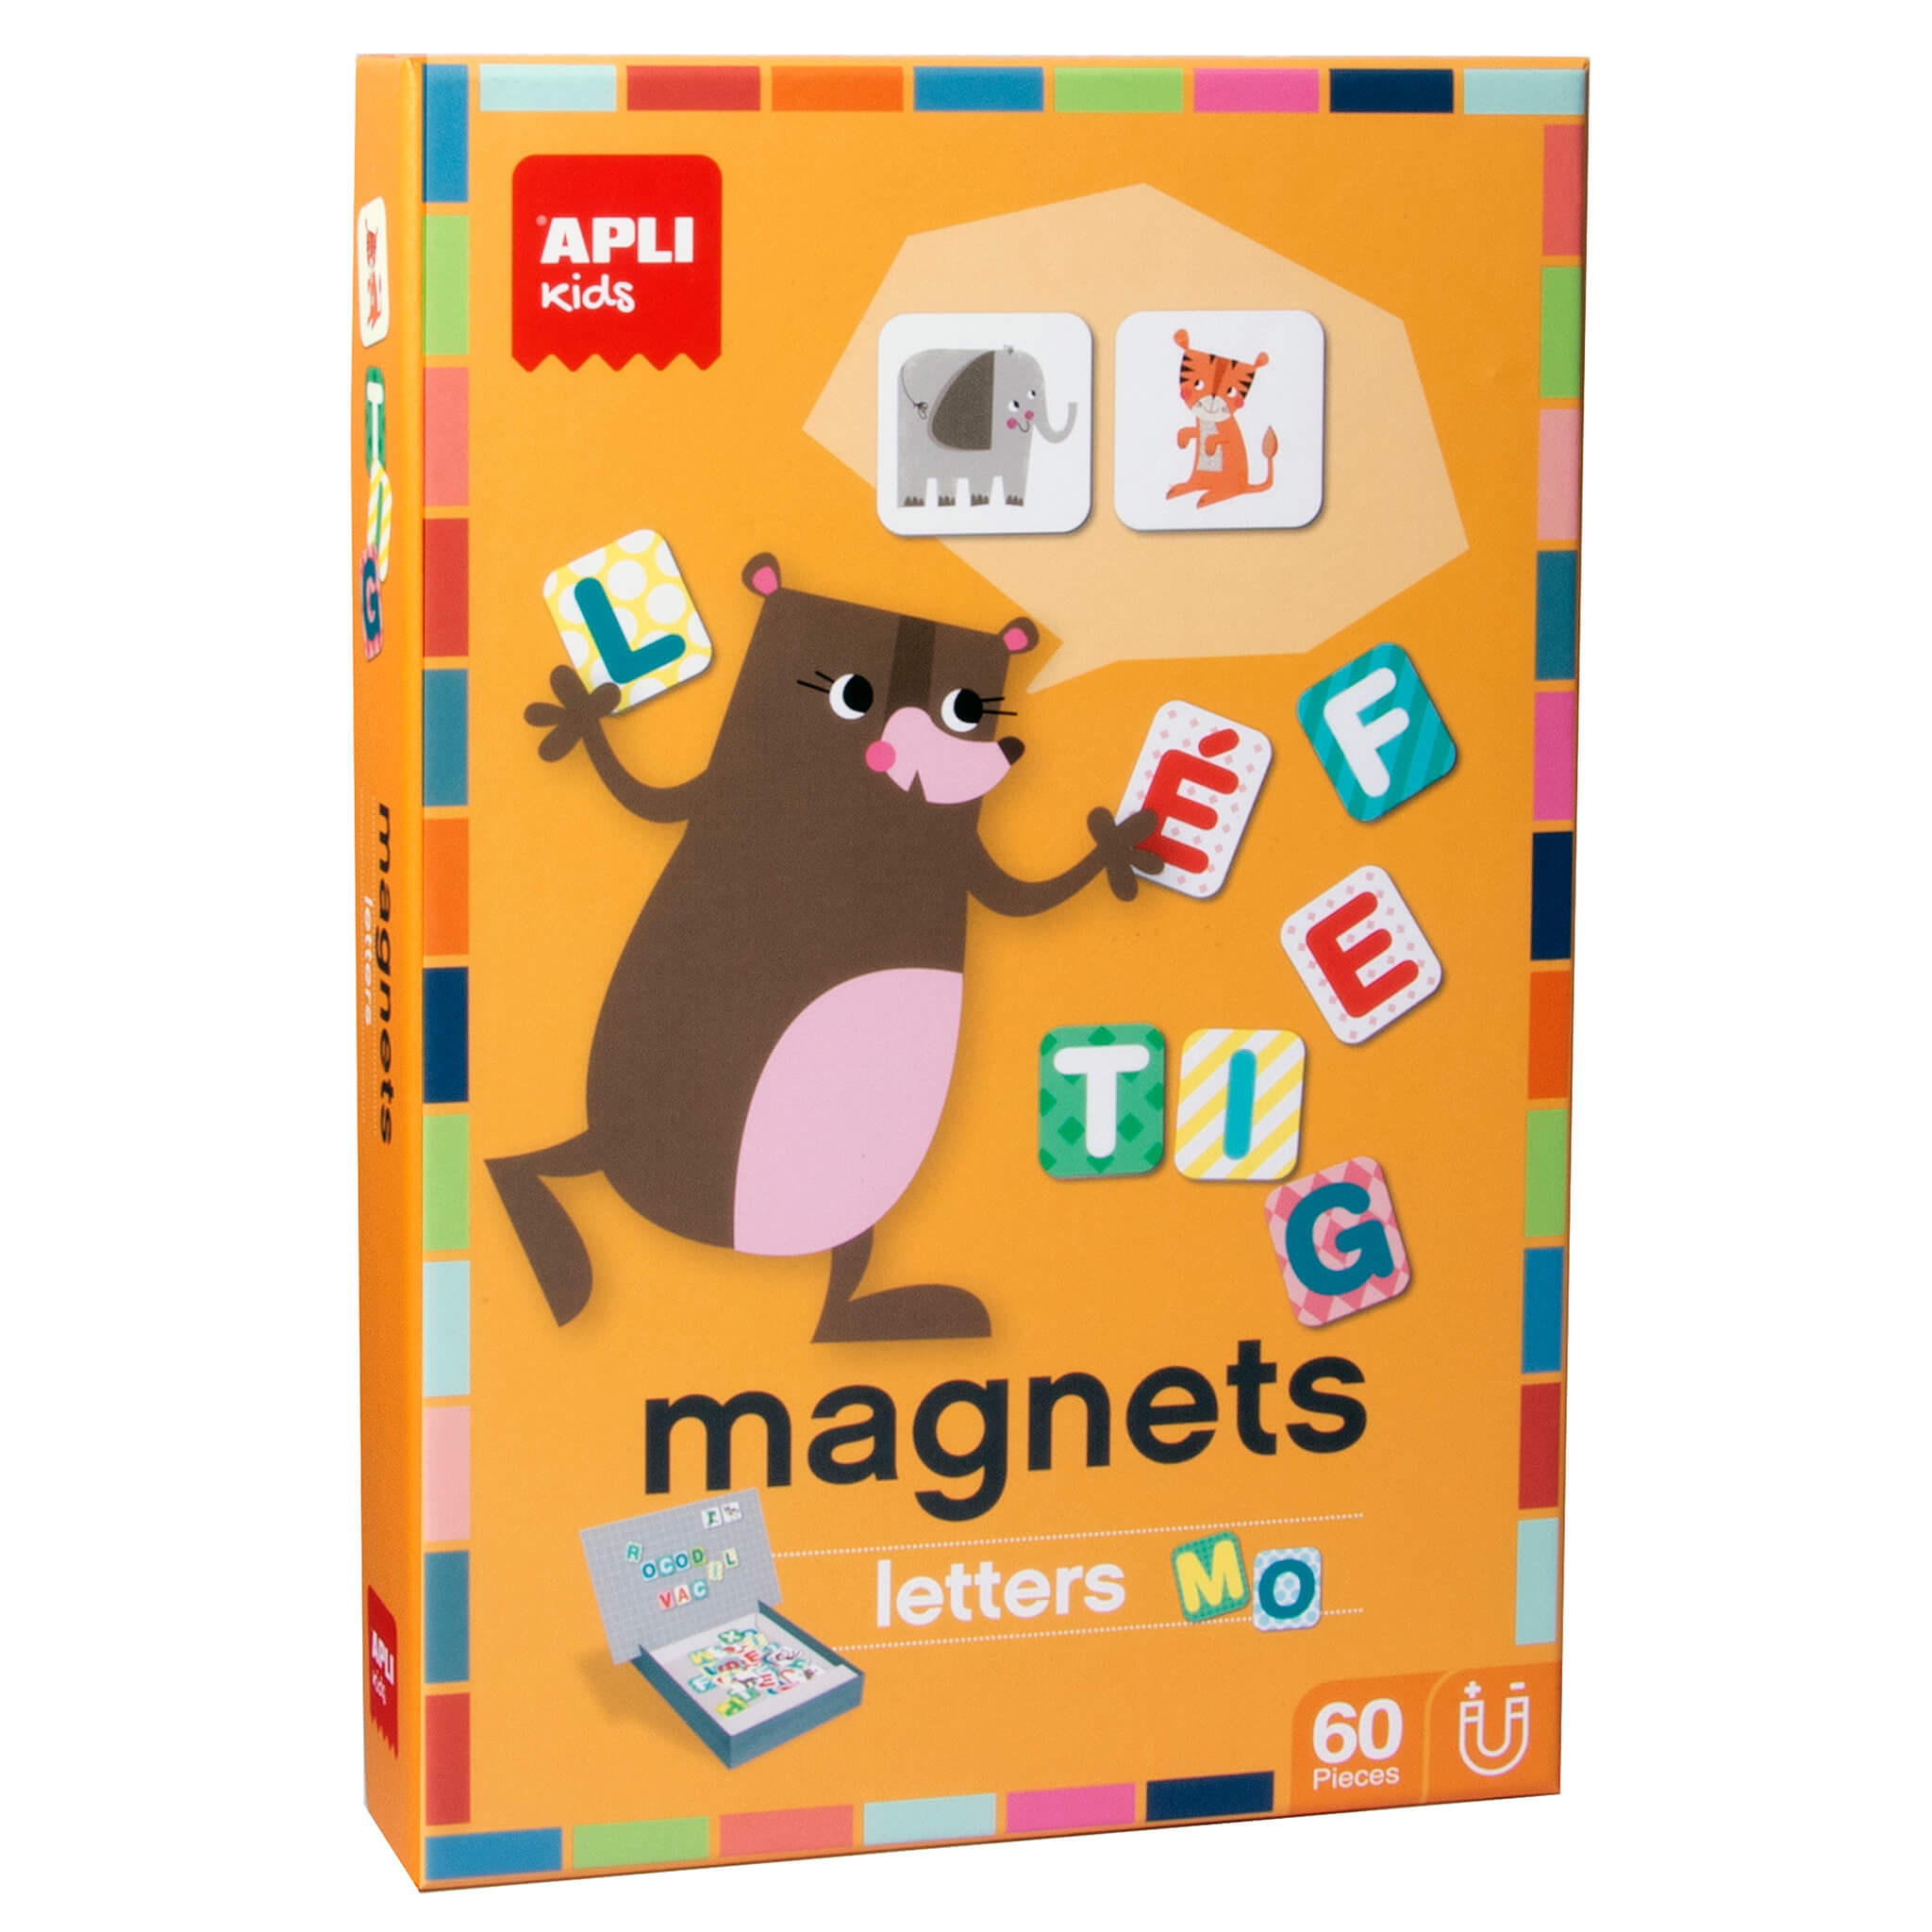 Letters magnets